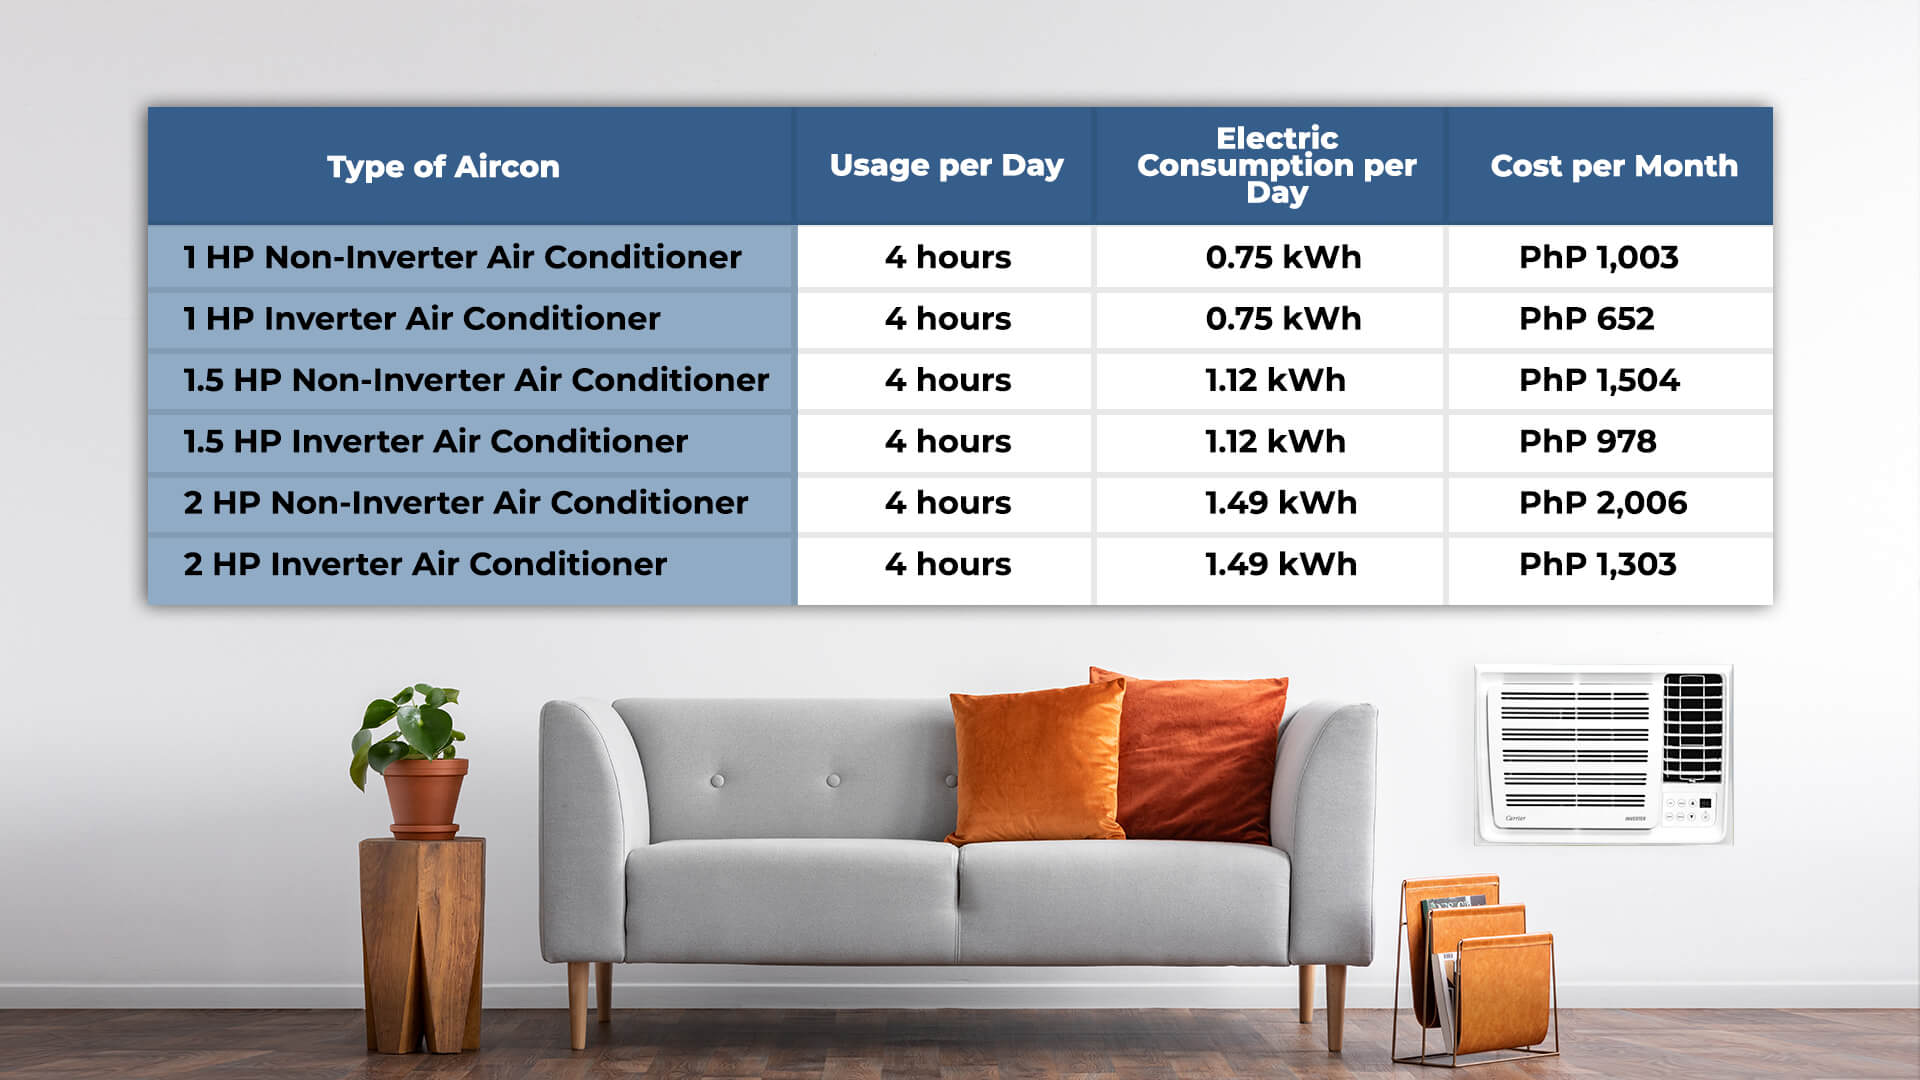 electric-consumption-per-type-of-aircon-per-month-infographic-carrier-philippines